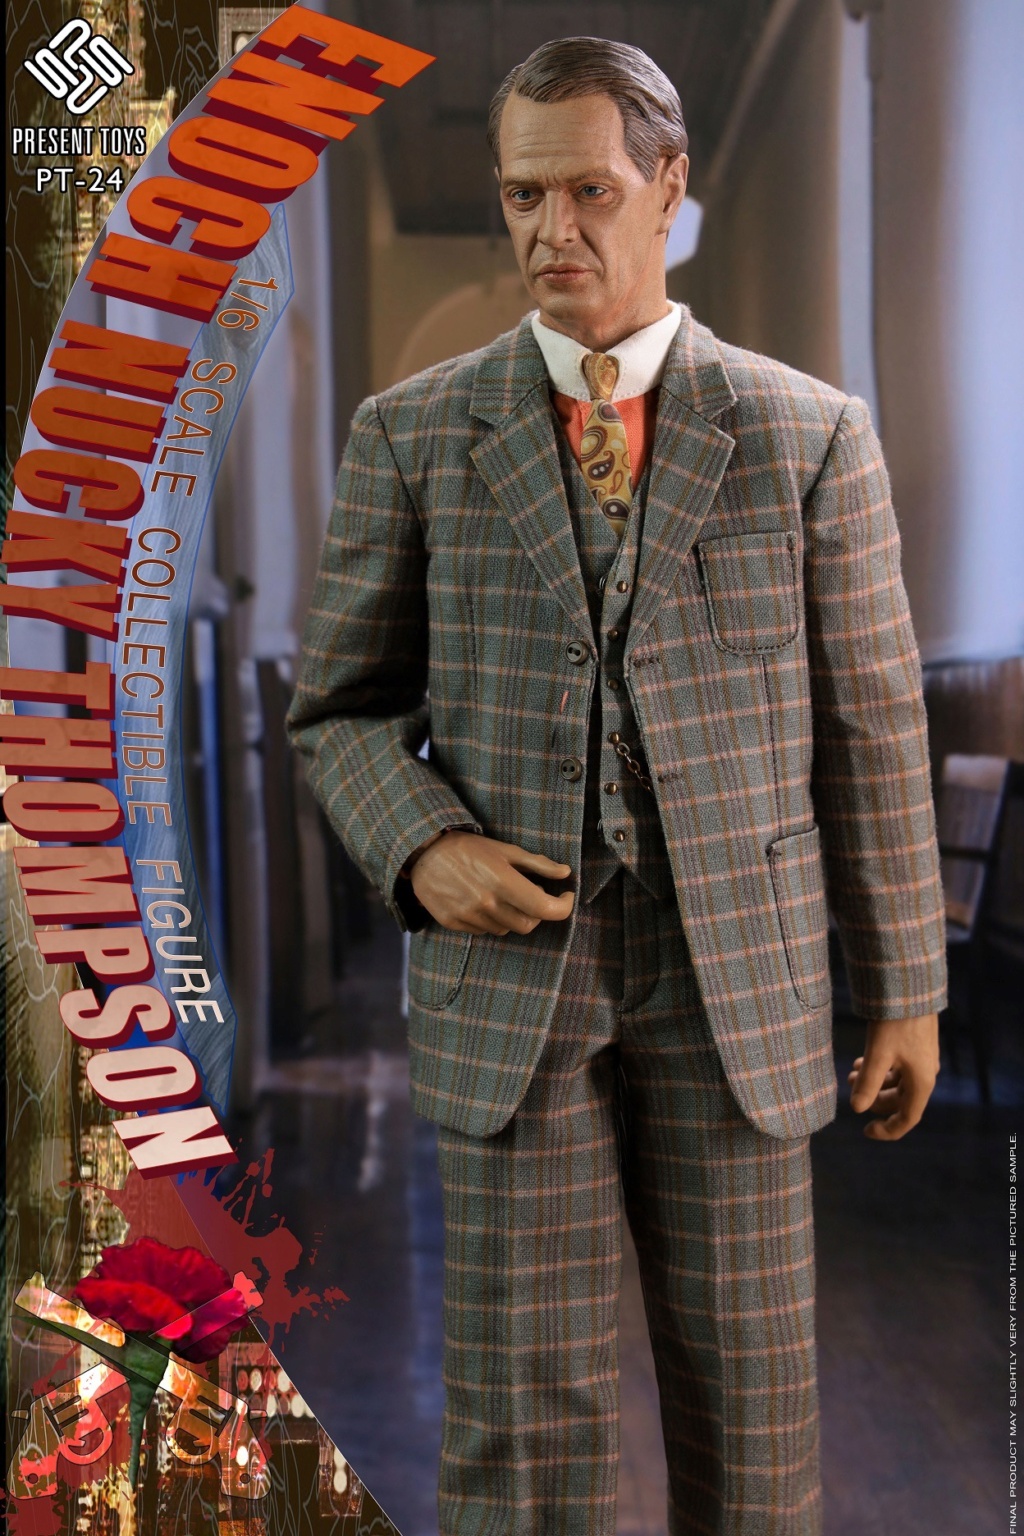 NEW PRODUCT: PRESENT TOYS: 1/6 Gangster Politician Action Figure #PT-SP24 16320410